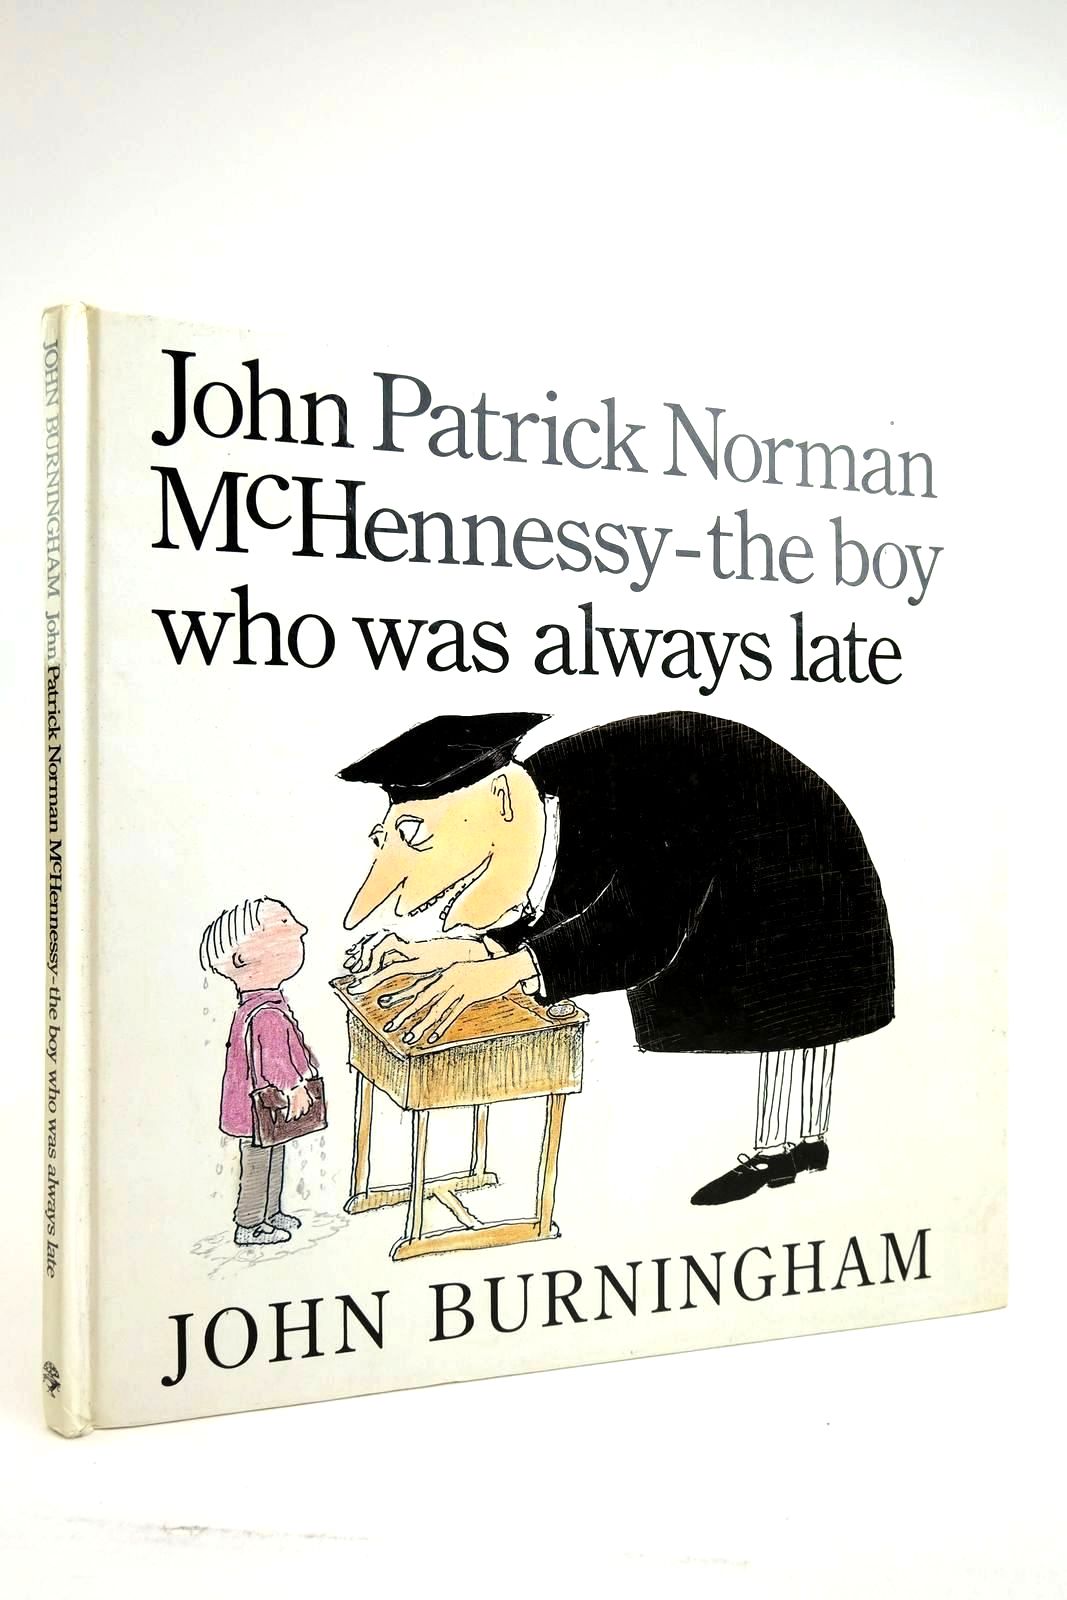 Photo of JOHN PATRICK NORMAN McHENNESSY-THE BOY WHO WAS ALWAYS LATE written by Burningham, John illustrated by Burningham, John published by Jonathan Cape (STOCK CODE: 2135892)  for sale by Stella & Rose's Books